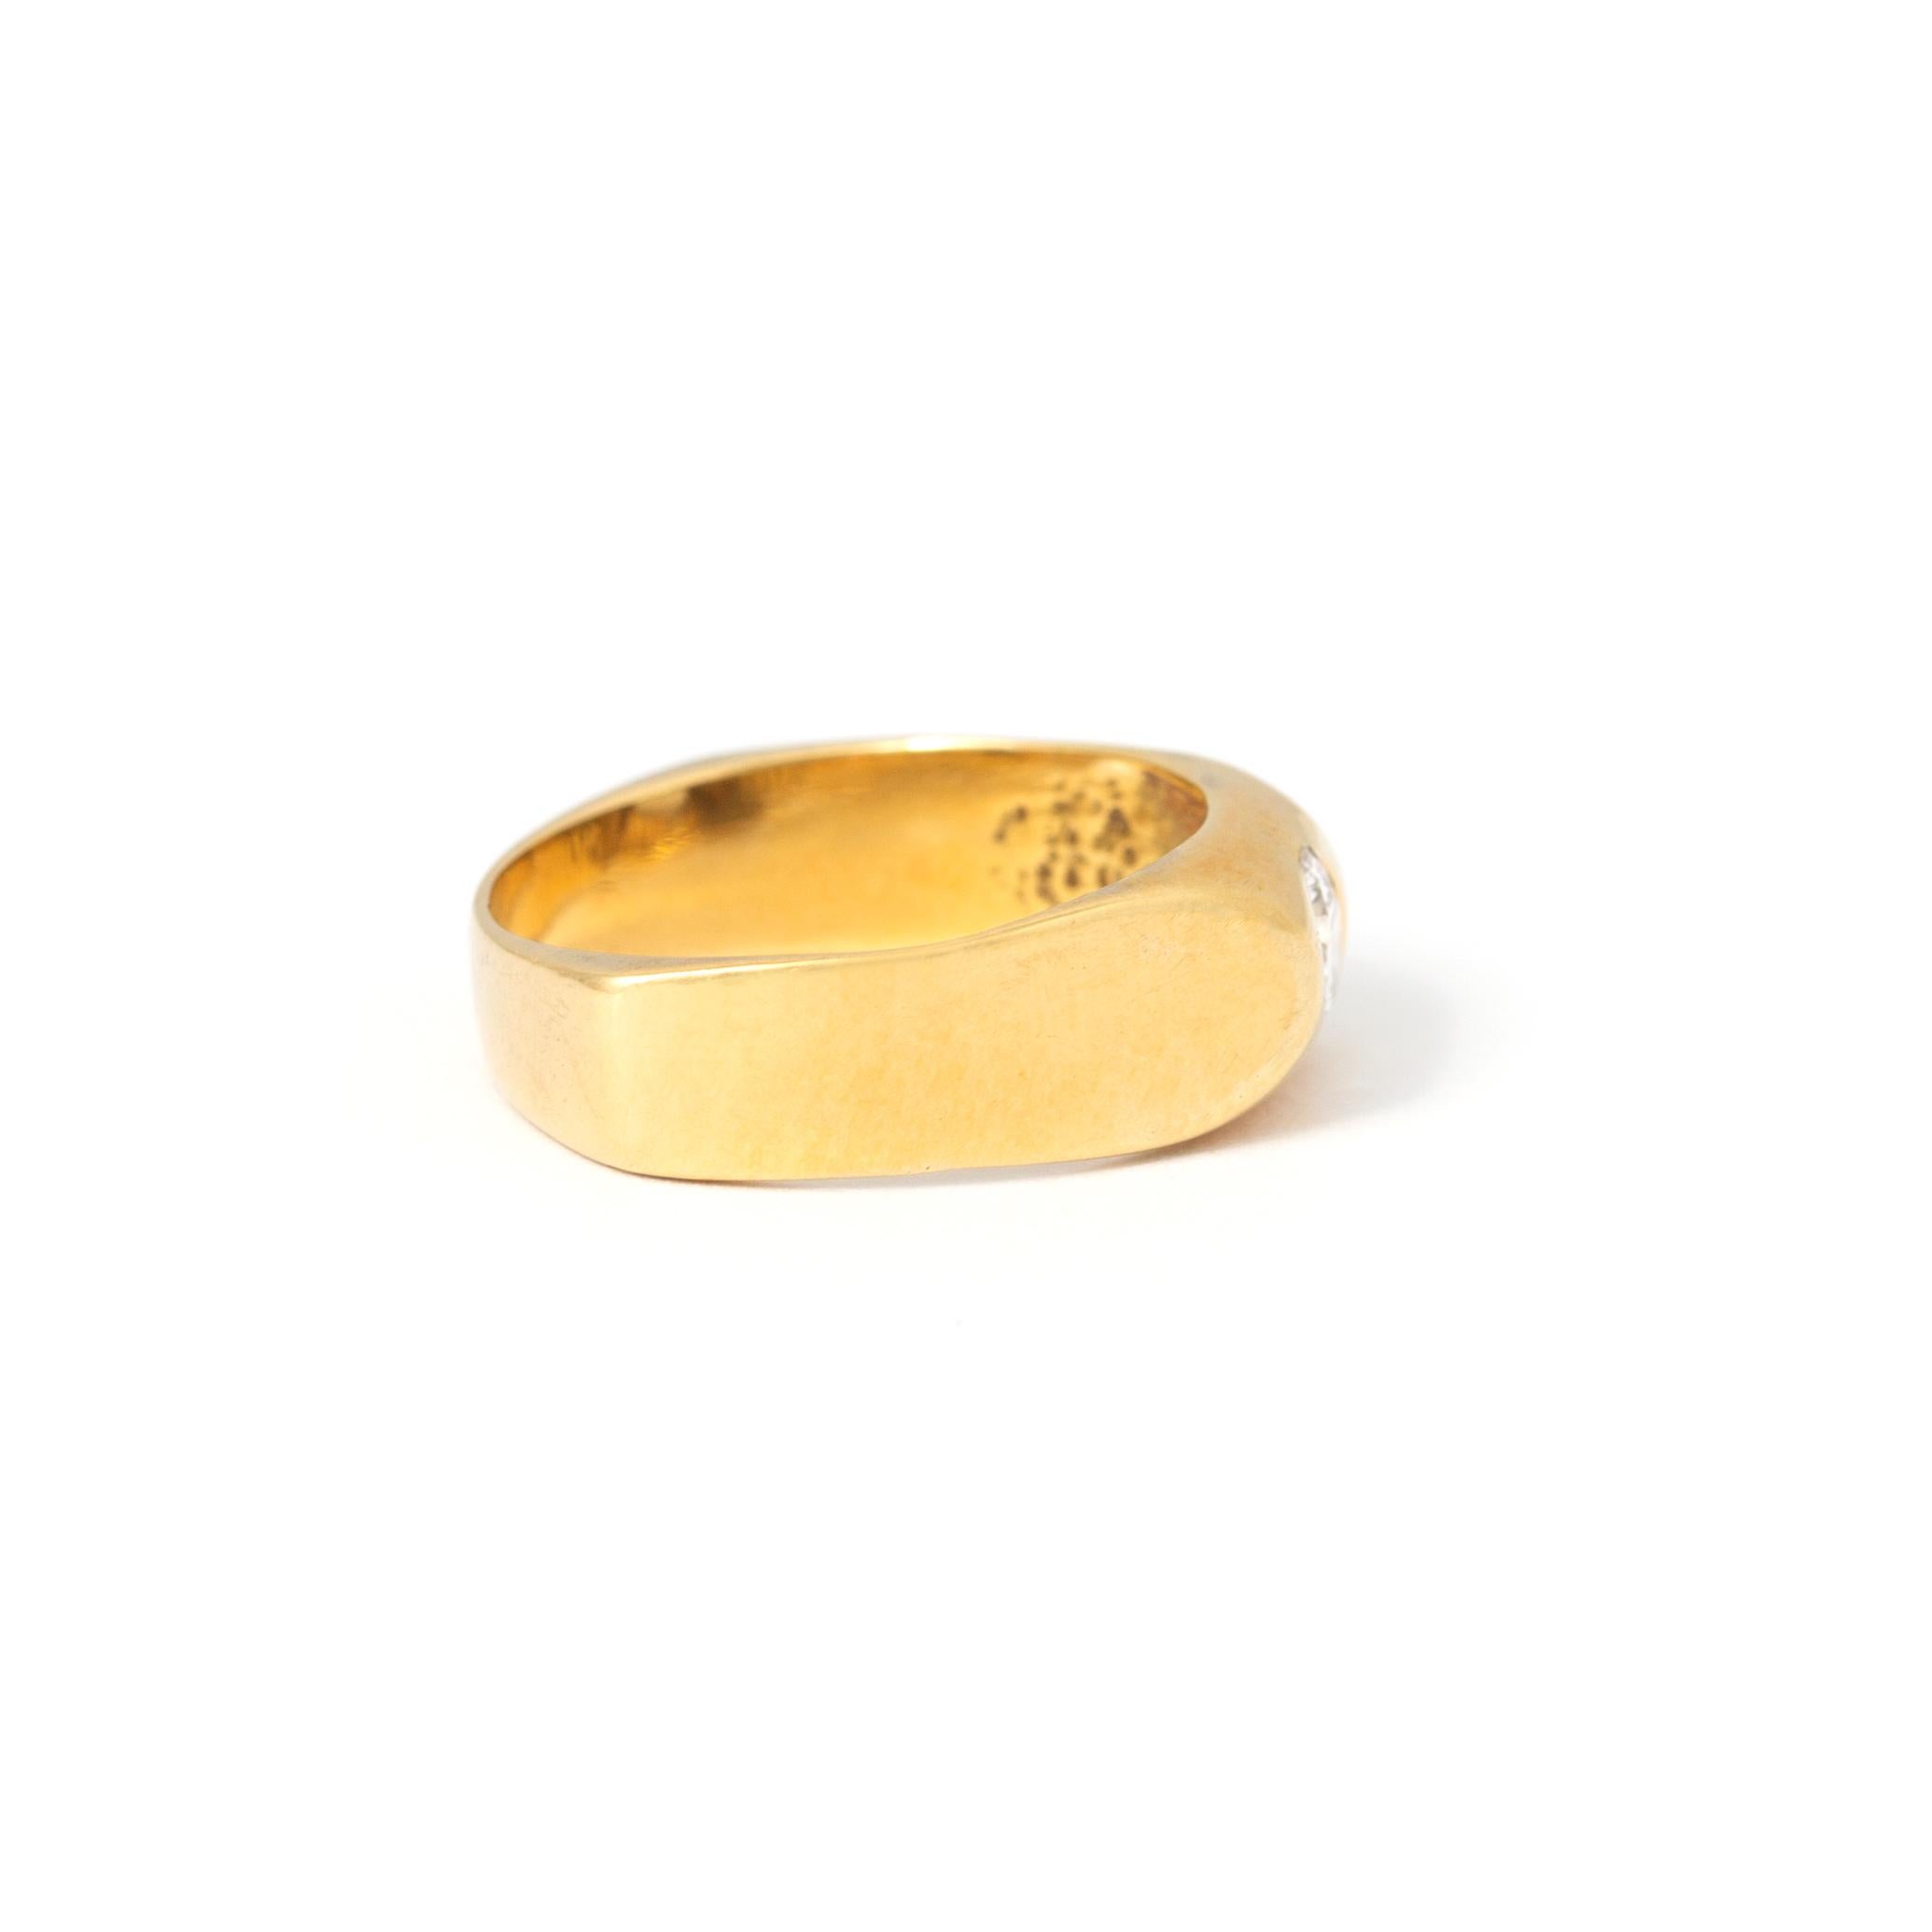 18K yellow gold ring centered by a round diamond. 
Modernist work. 
Mid-20th century. 
Diamond dimensions: 4.42 x 4.36 x 2.46 mm. 
Ring body width: 6.21 mm. 
Size: 48.5. 
Gross weight: 3.39 grams.